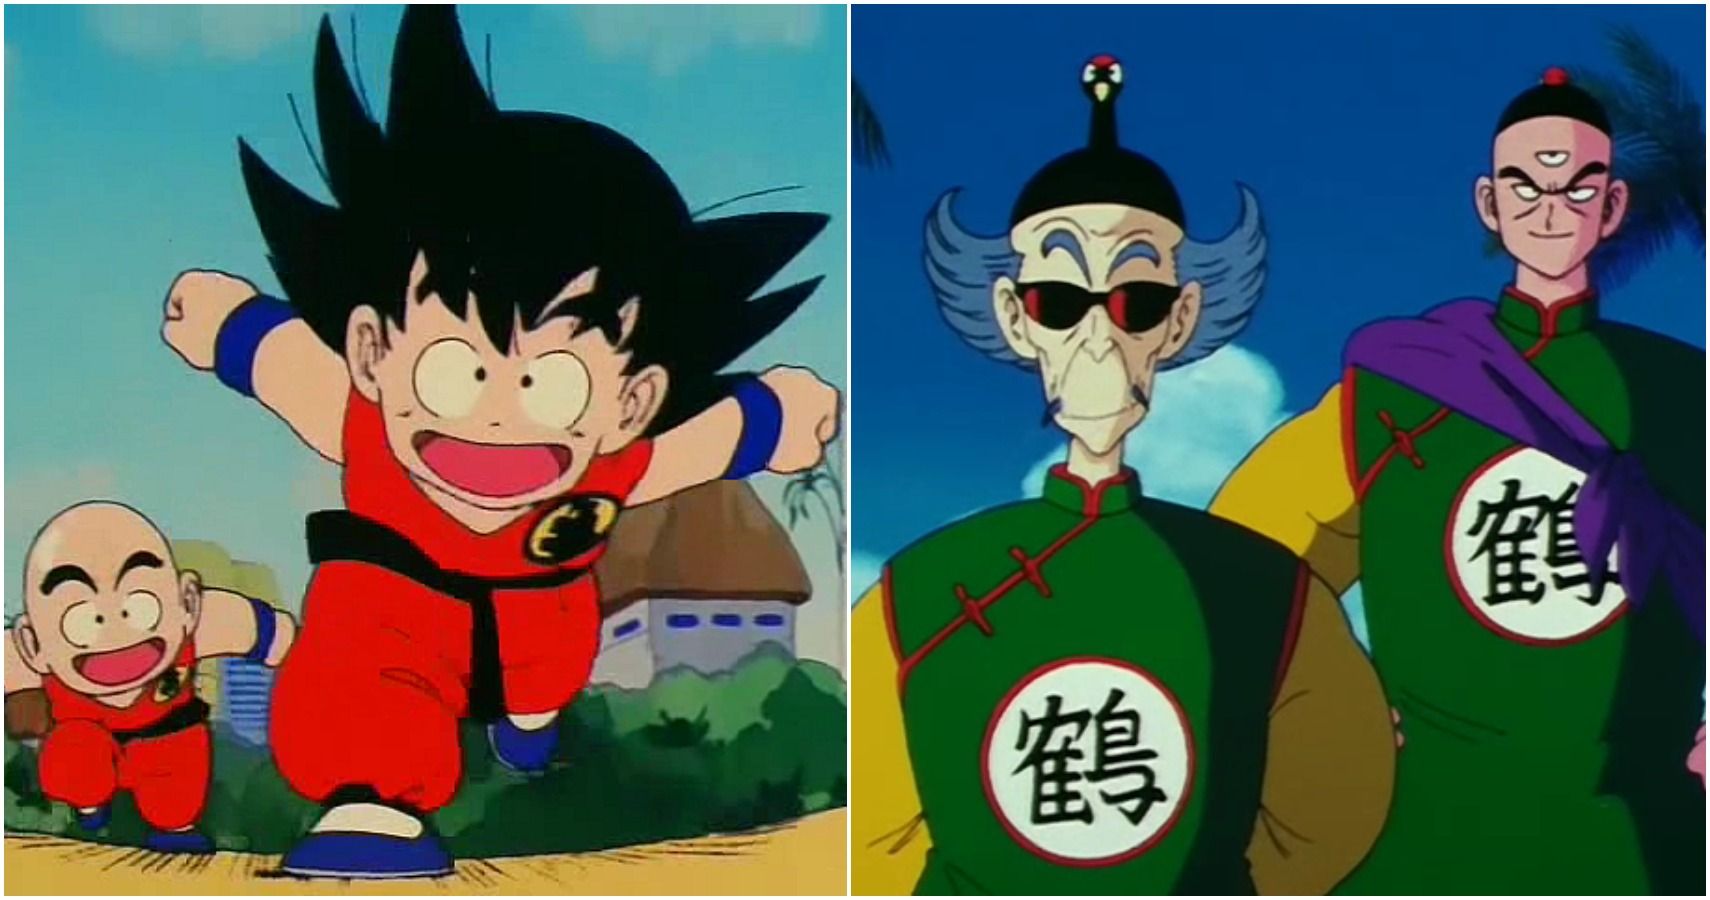 Featured - Goku and Krillin in the Turtle School Uniform and Tien and Master Shen in the Crane School Uniform